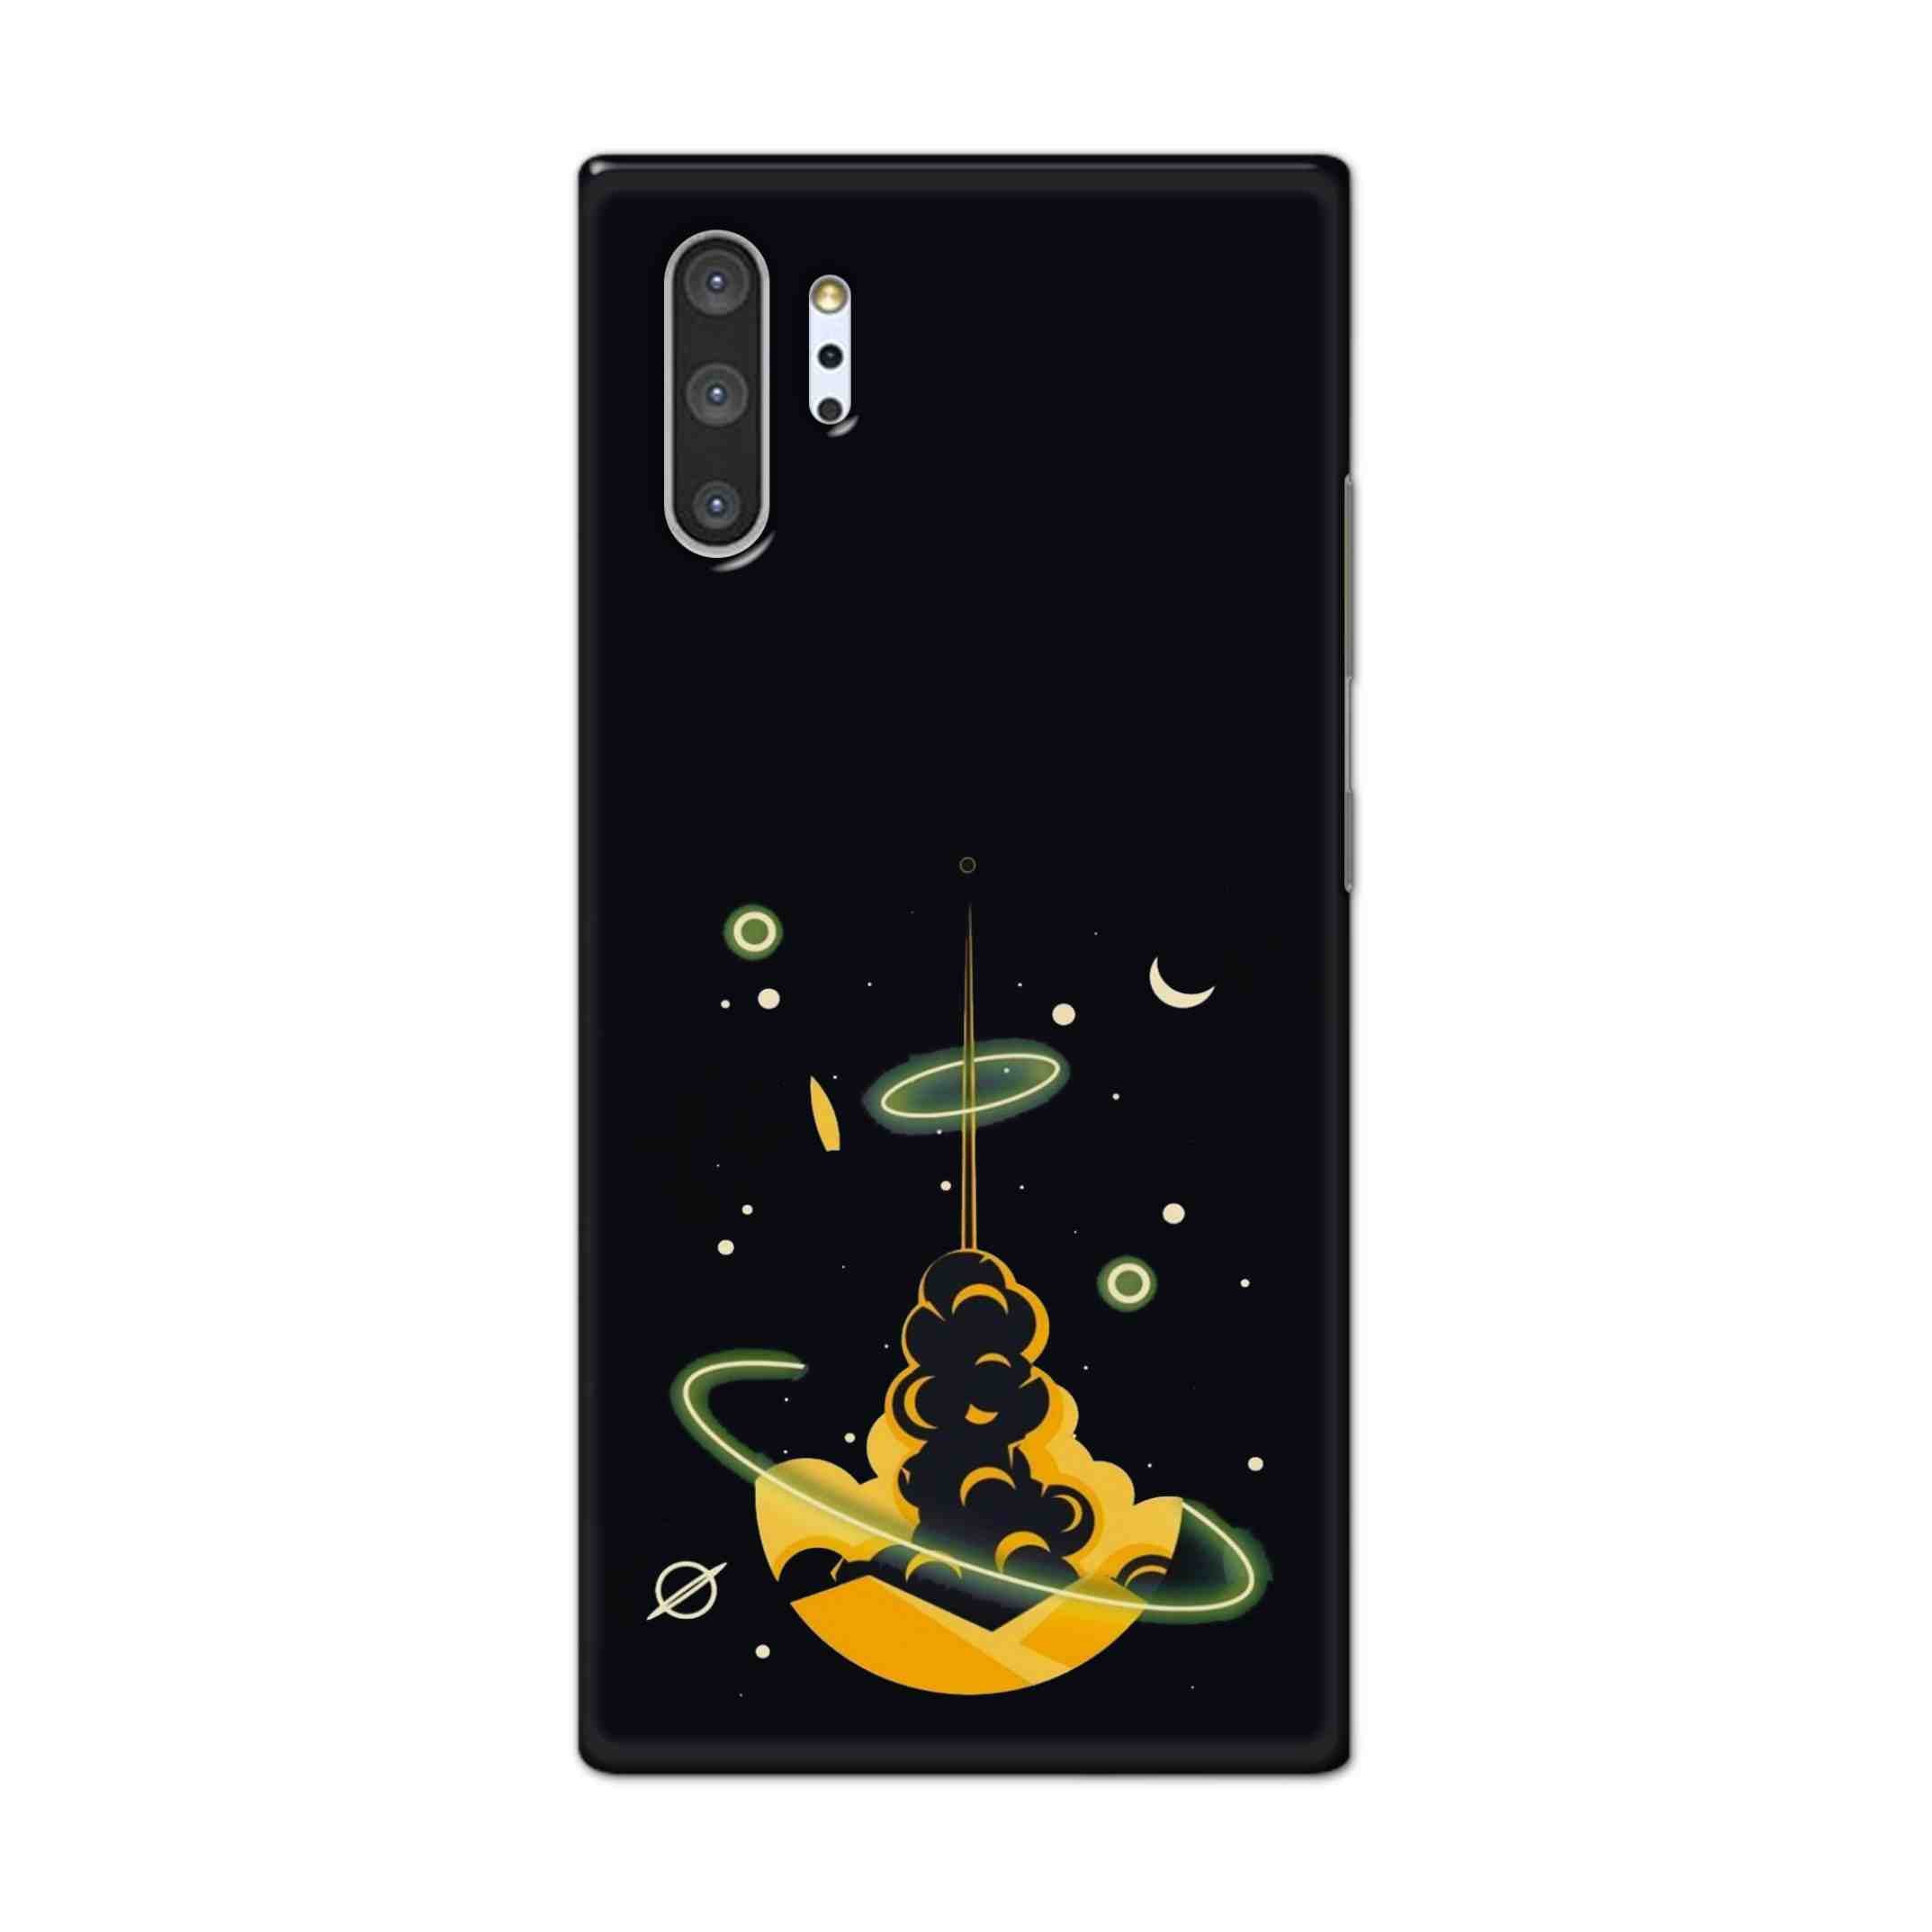 Buy Moon Hard Back Mobile Phone Case Cover For Samsung Galaxy Note 10 Pro Online